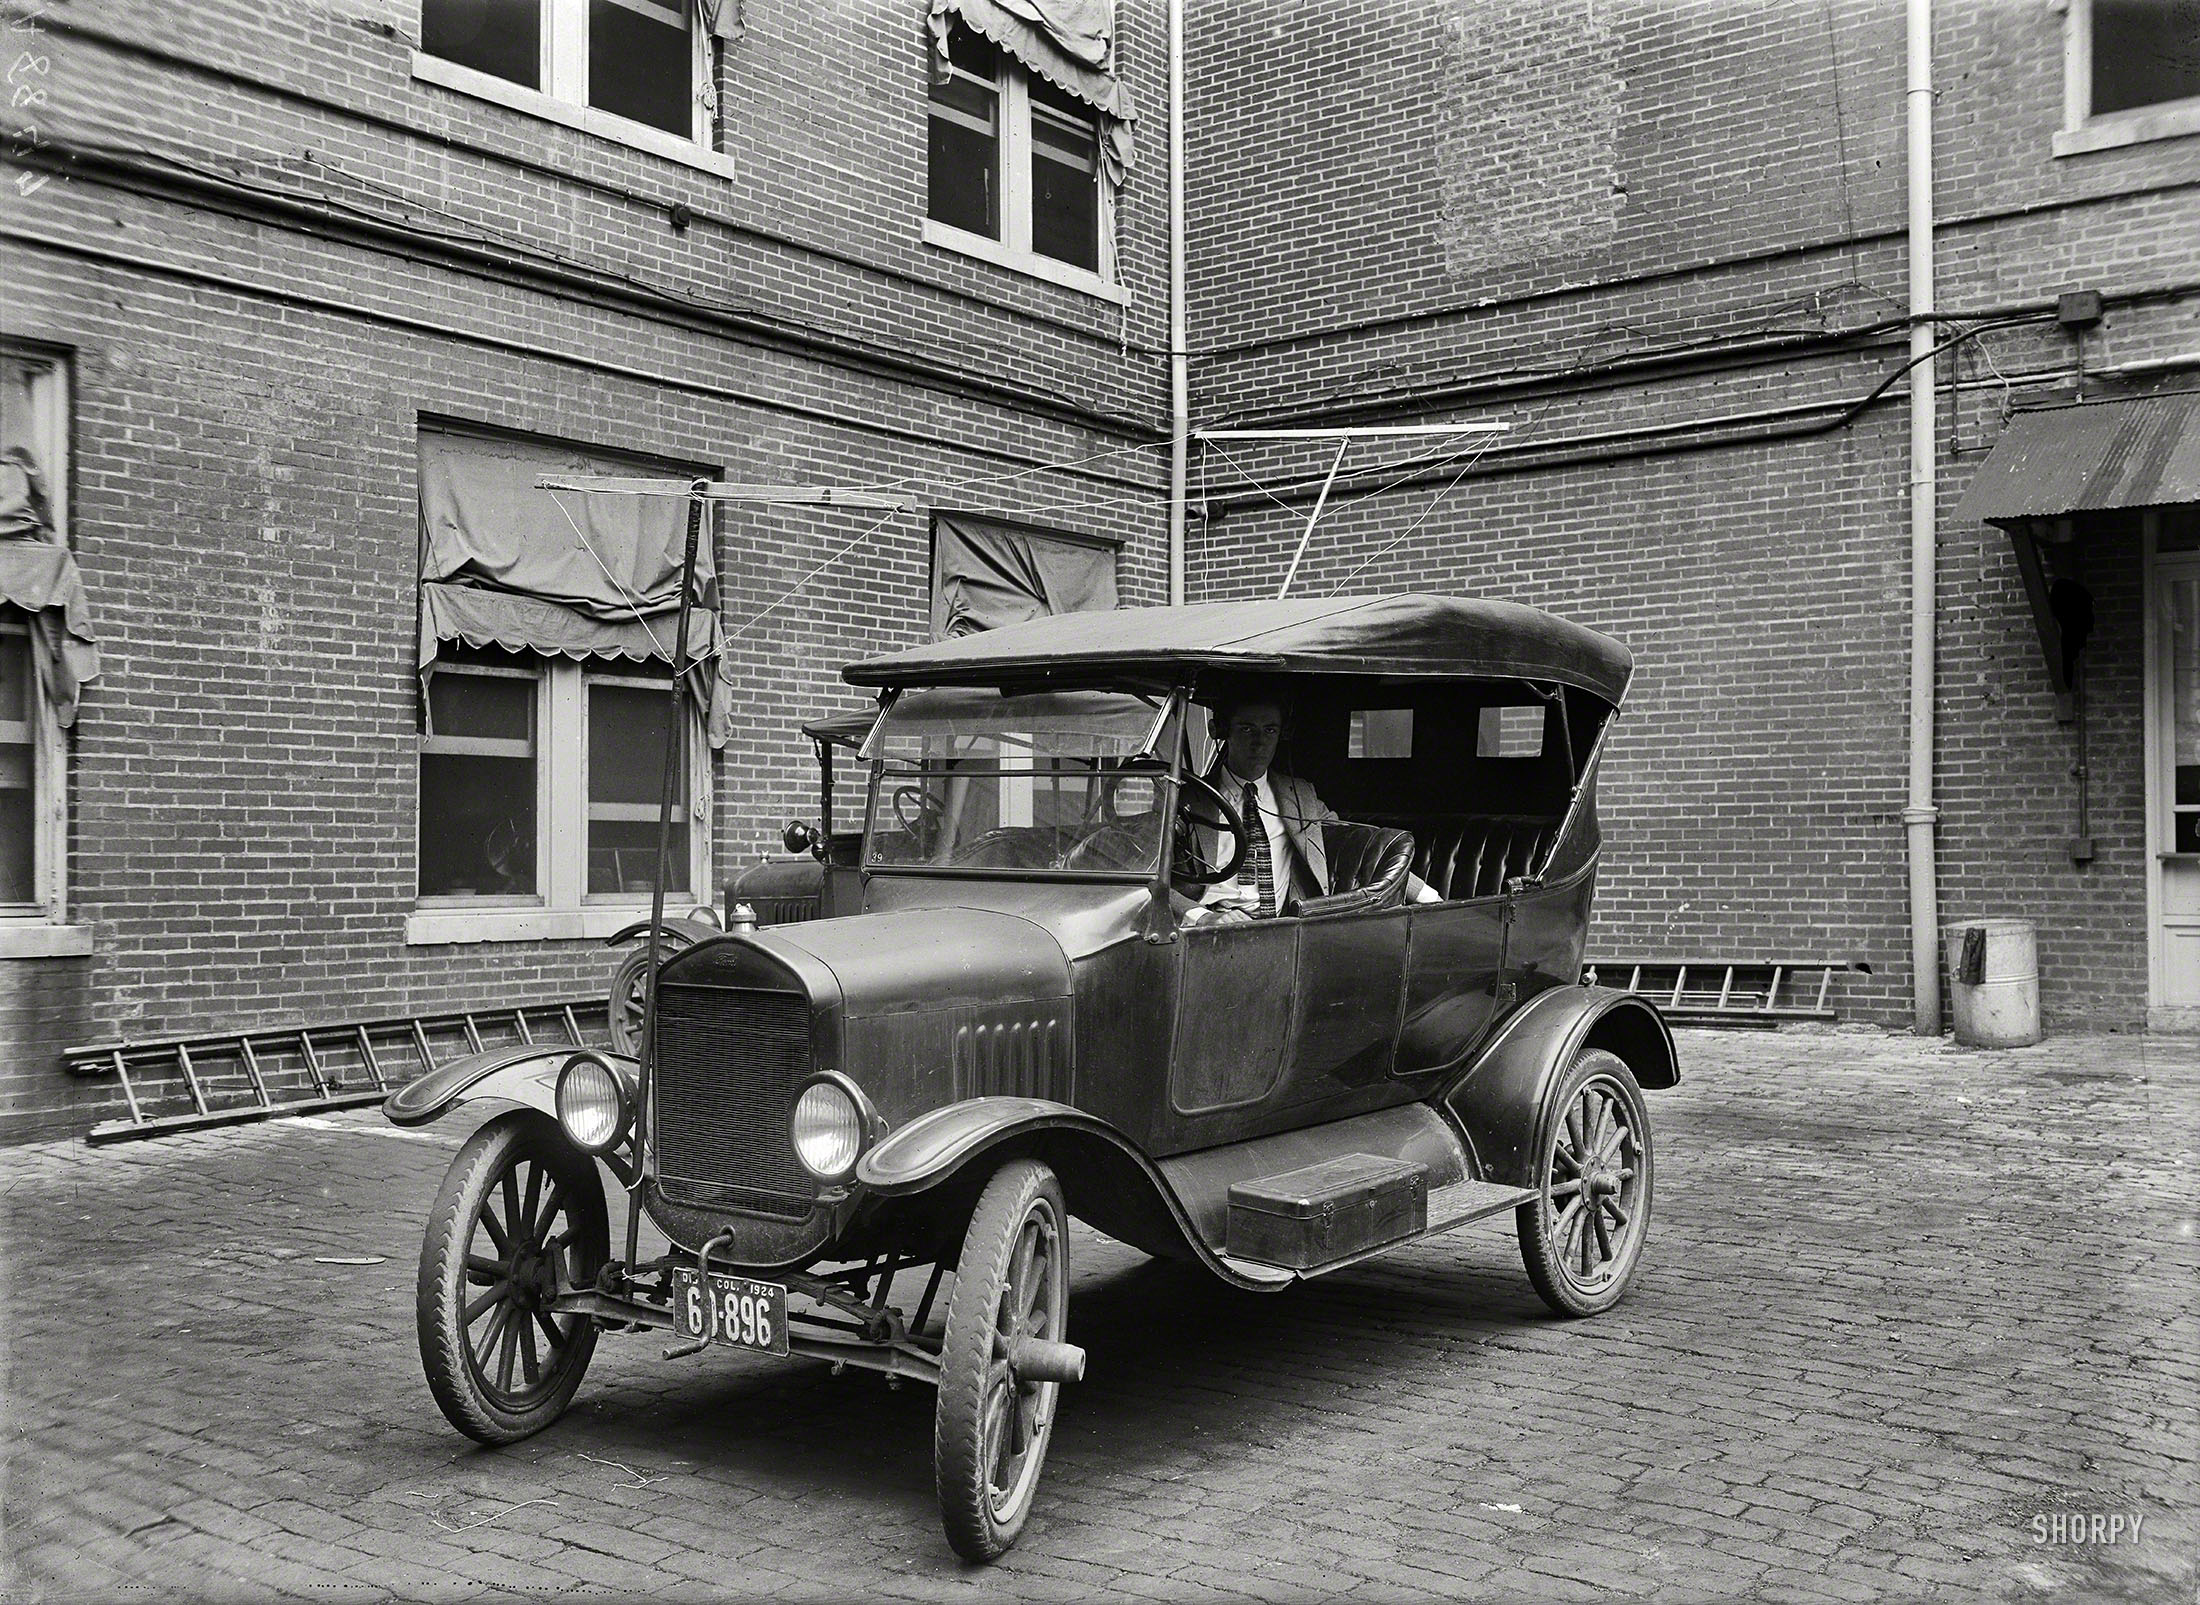 1924. Washington, D.C. "Auto equipped with radio (made for Potomac Electric Power Co.)" Another look at the high-tech Model T seen here a few days ago. Can the 8-Track be far behind? Harris & Ewing glass negative. View full size.